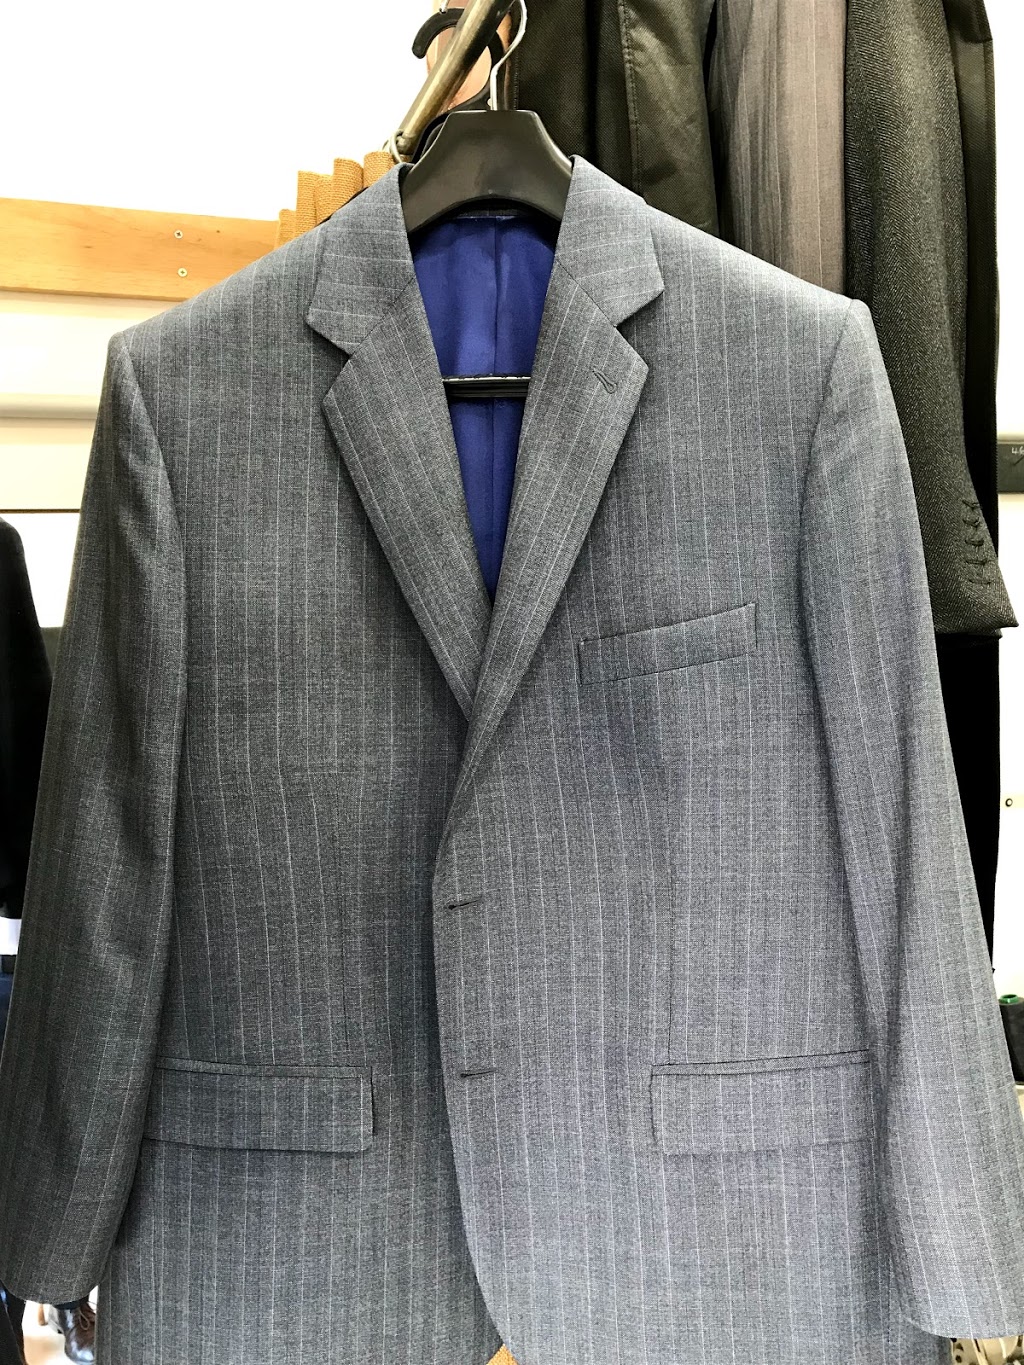 Stitch and Co. - Bespoke Tailor Suits Sydney | 49 Bungaree Rd, Toongabbie NSW 2146, Australia | Phone: 0416 633 440